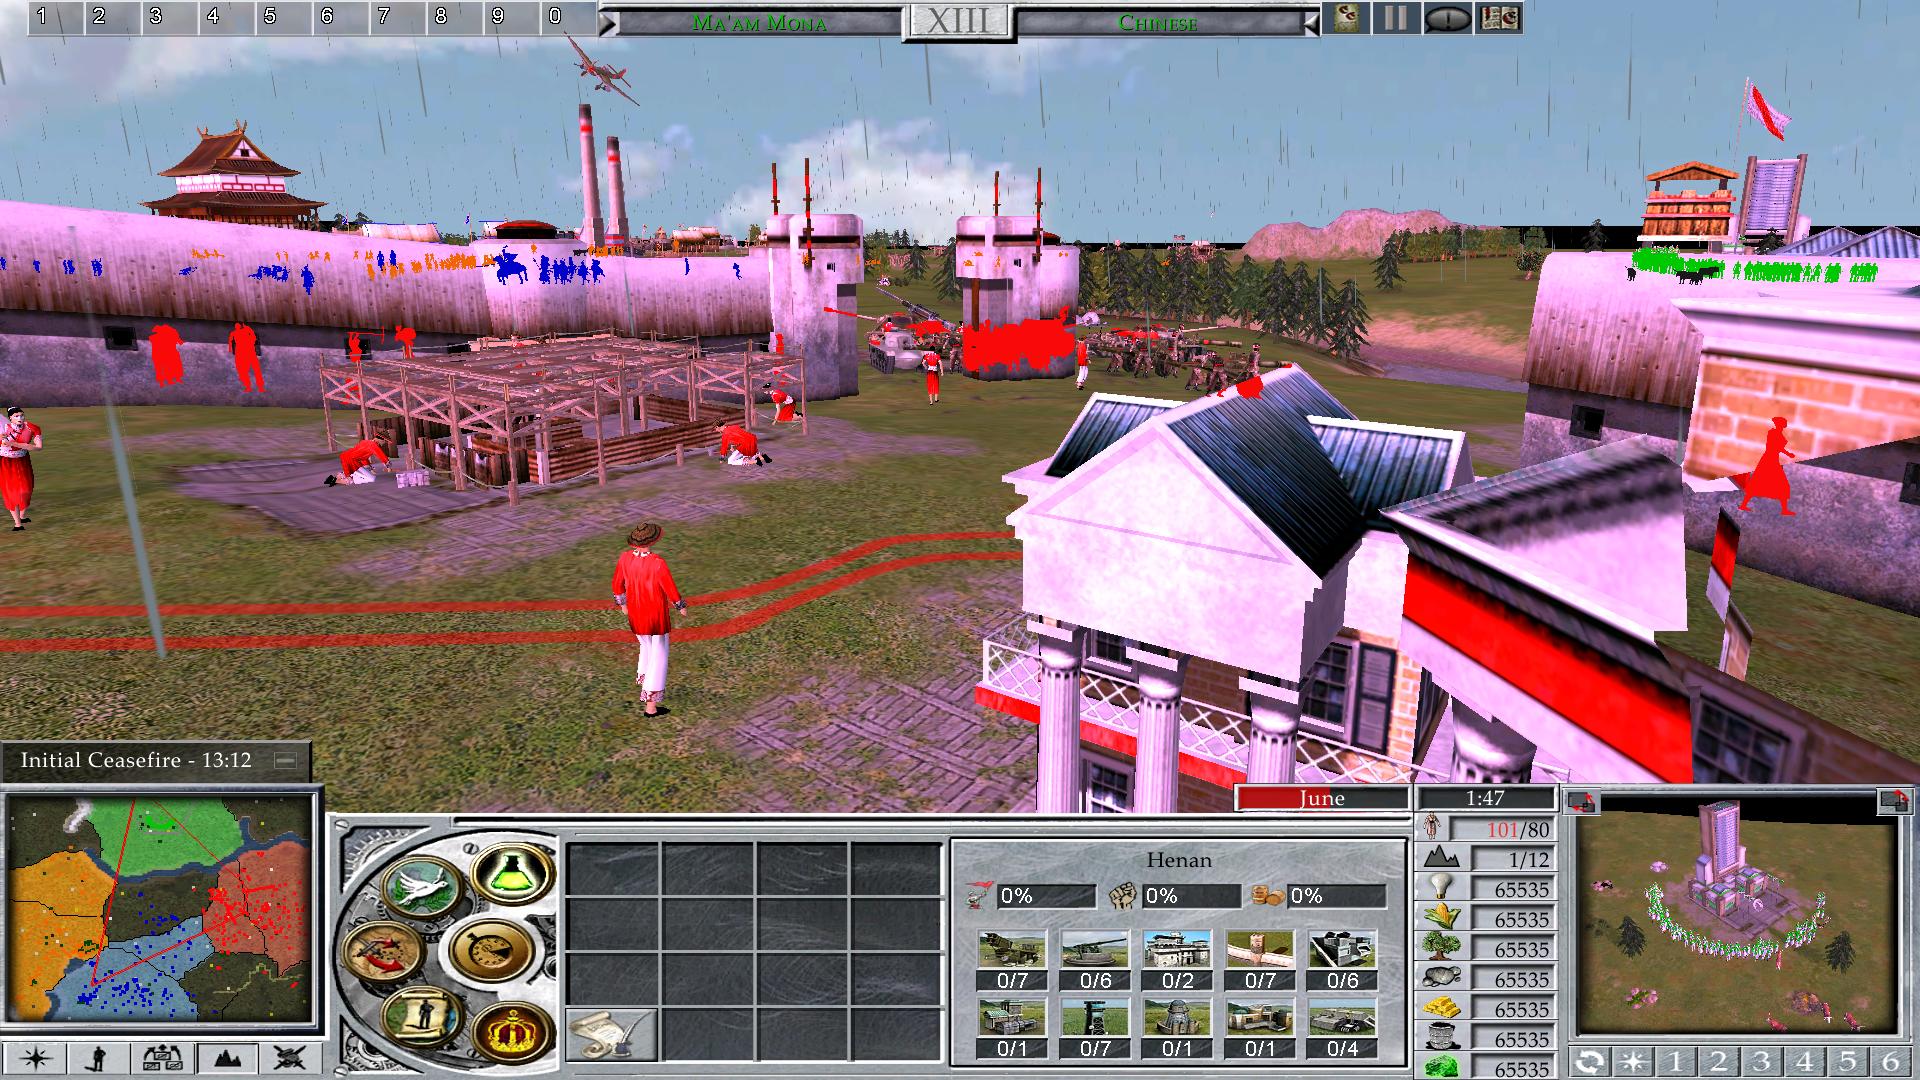 empire earth 2 patch 1.5